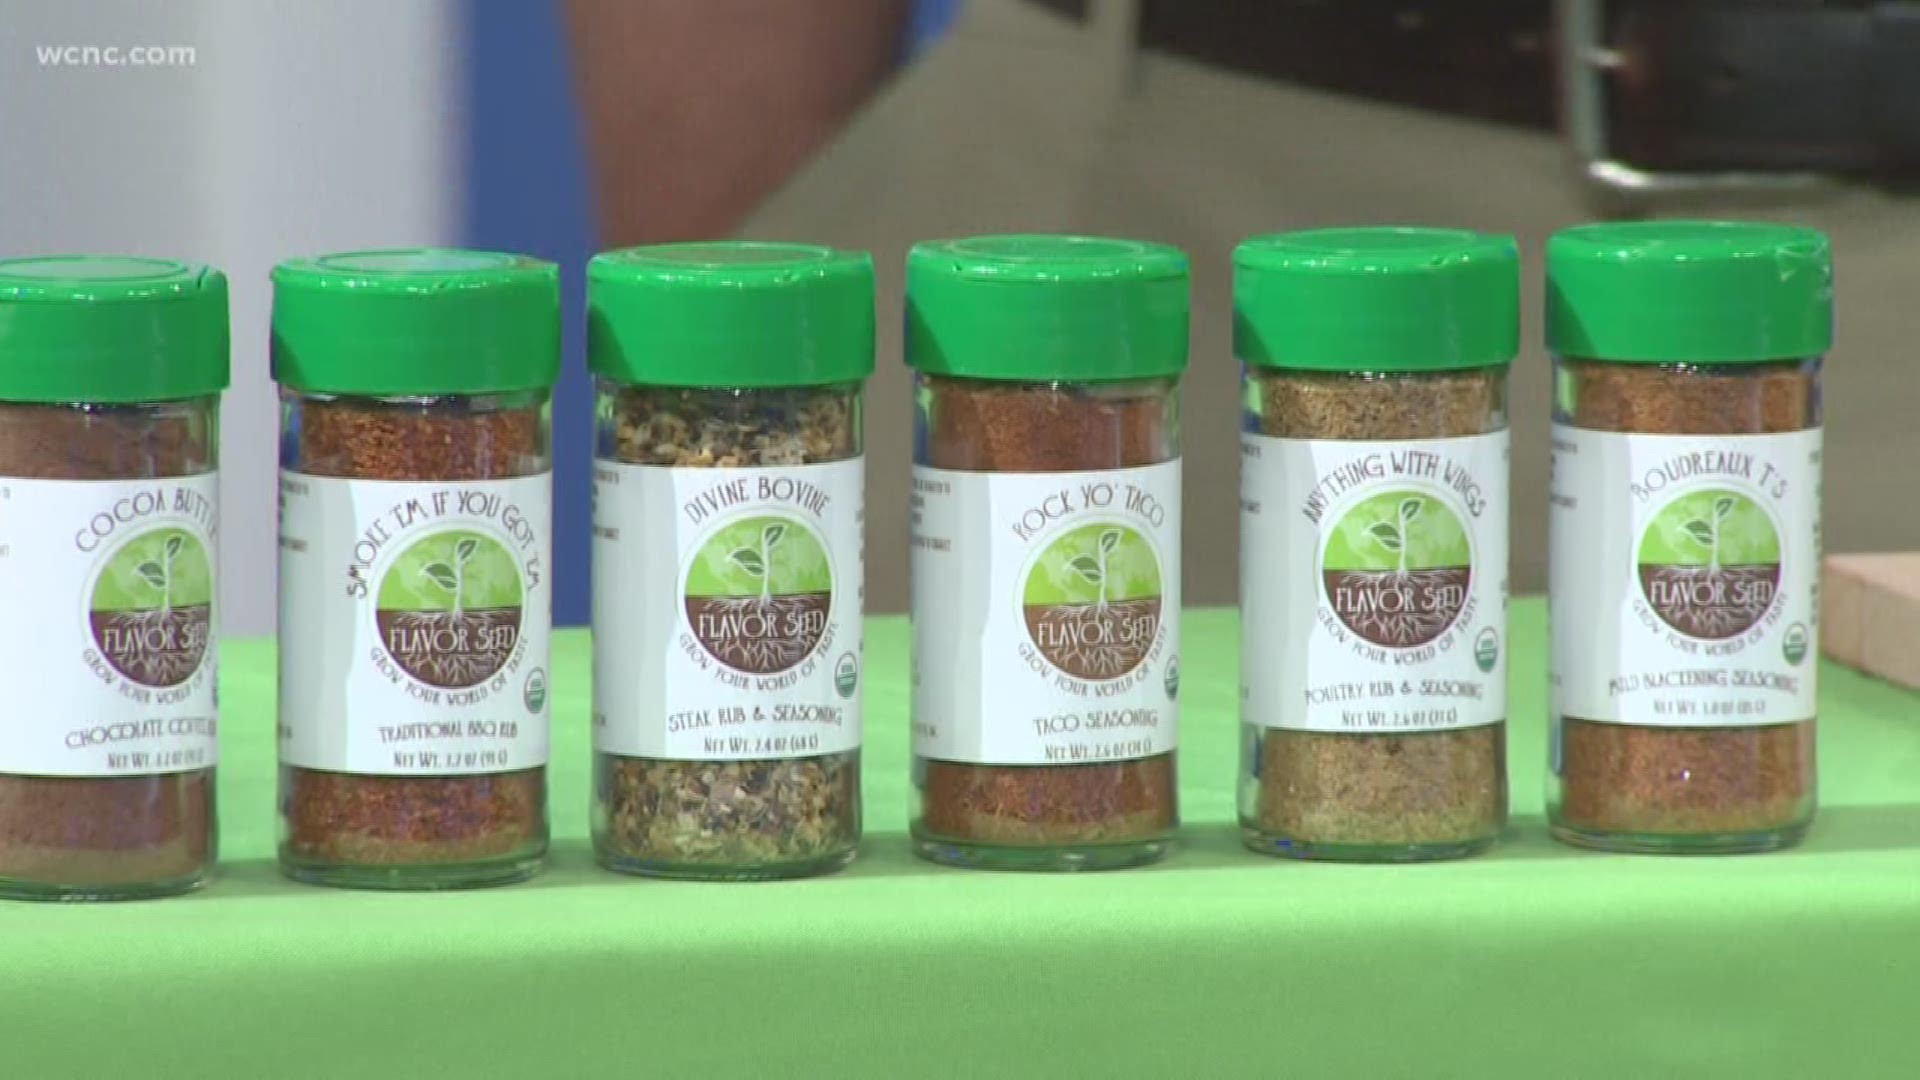 A local man created Flavor Seed to help people eat healthy, organic and delicious food with the help of his spice blends.